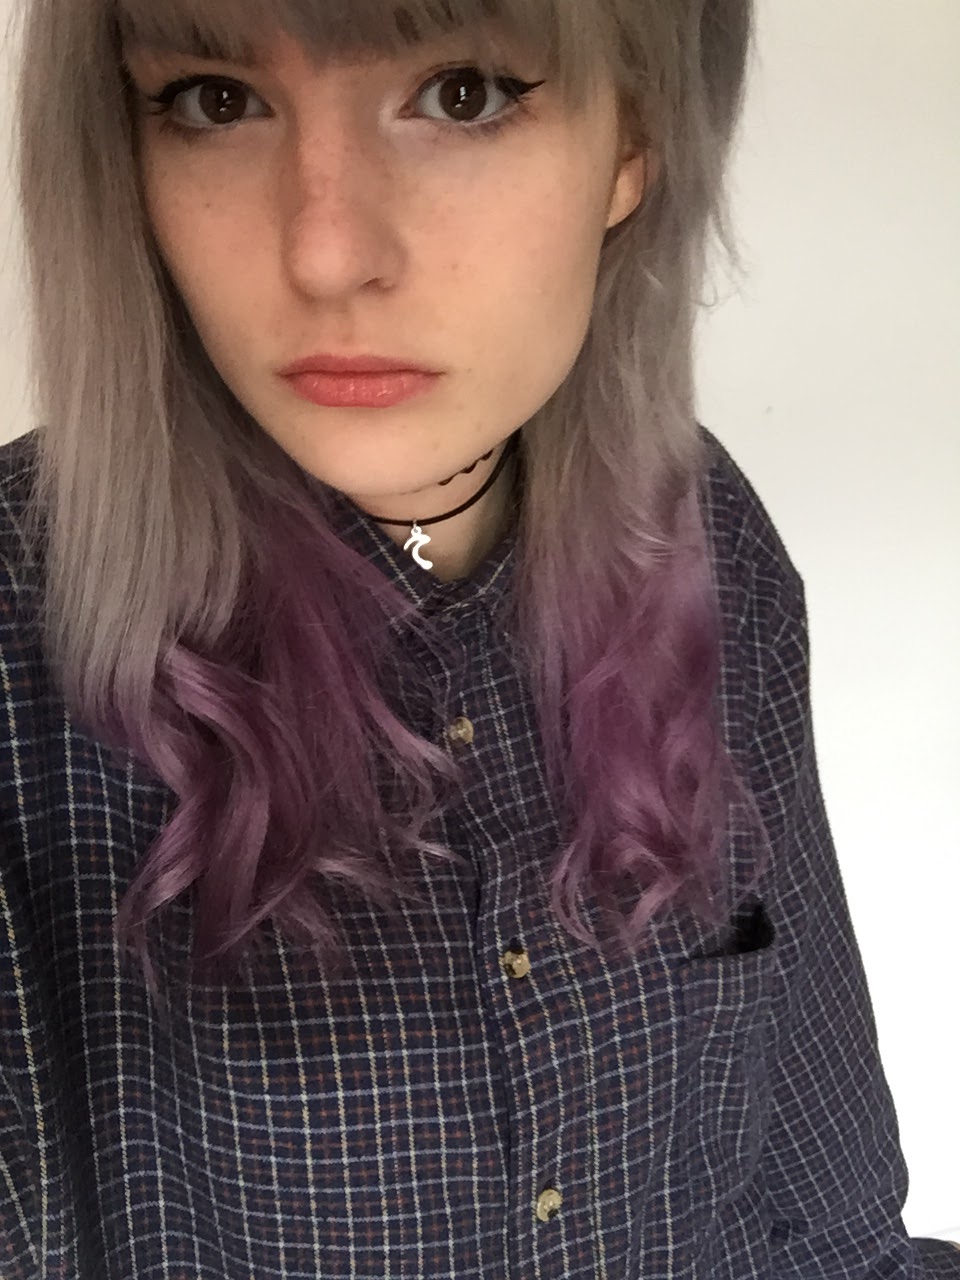 L'Oreal Colorista Washout in Lilac// Hair update and review